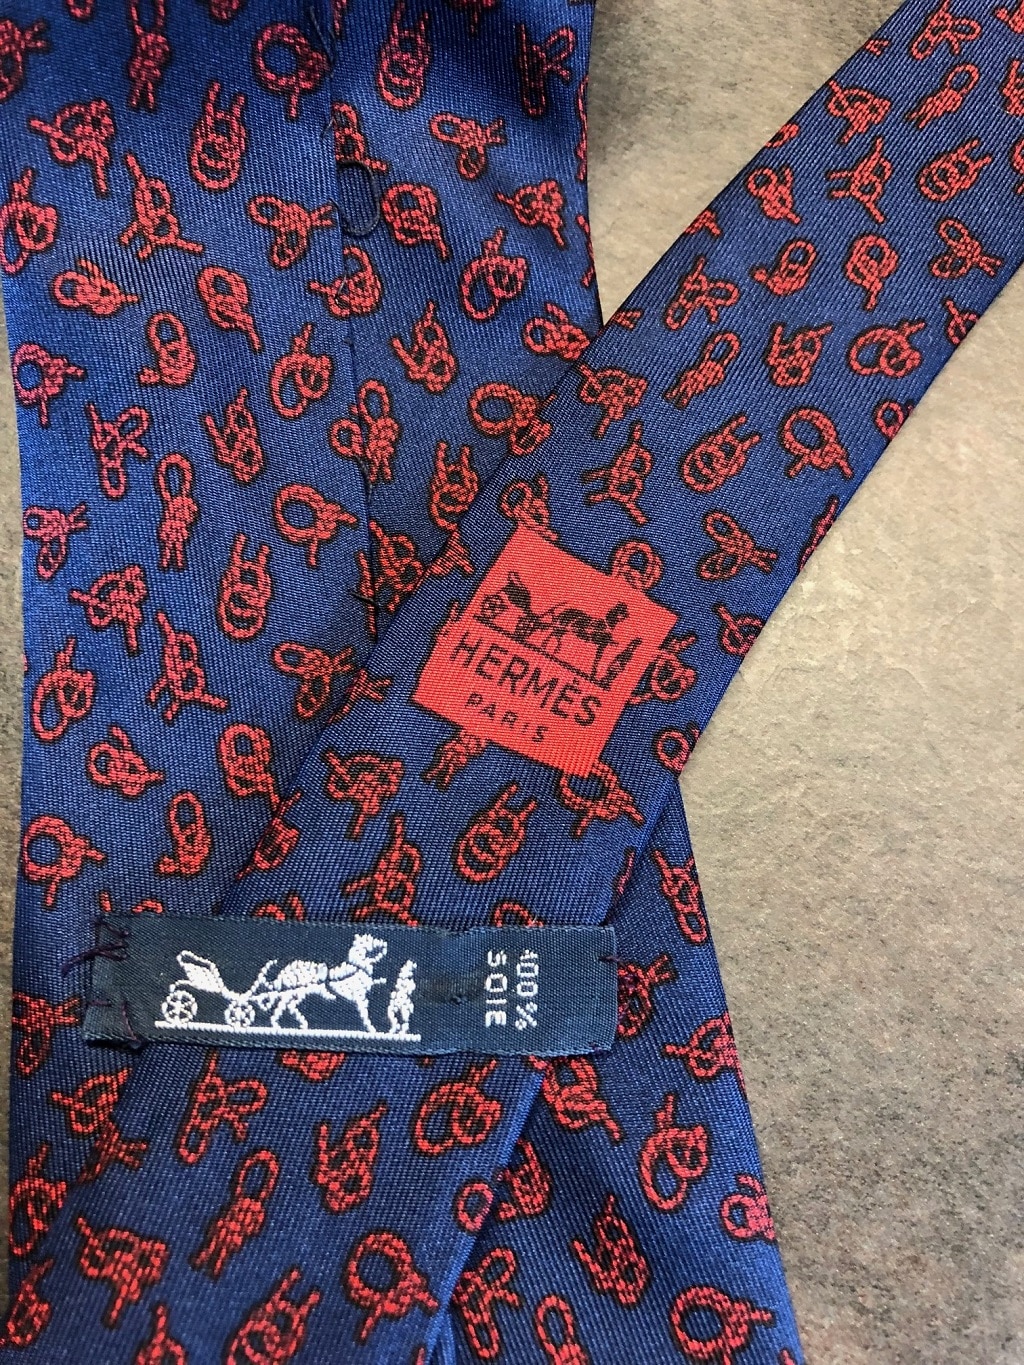 HERMES - Navy Blue Burgundy Knotted Print Bow Tie - Blue, Red